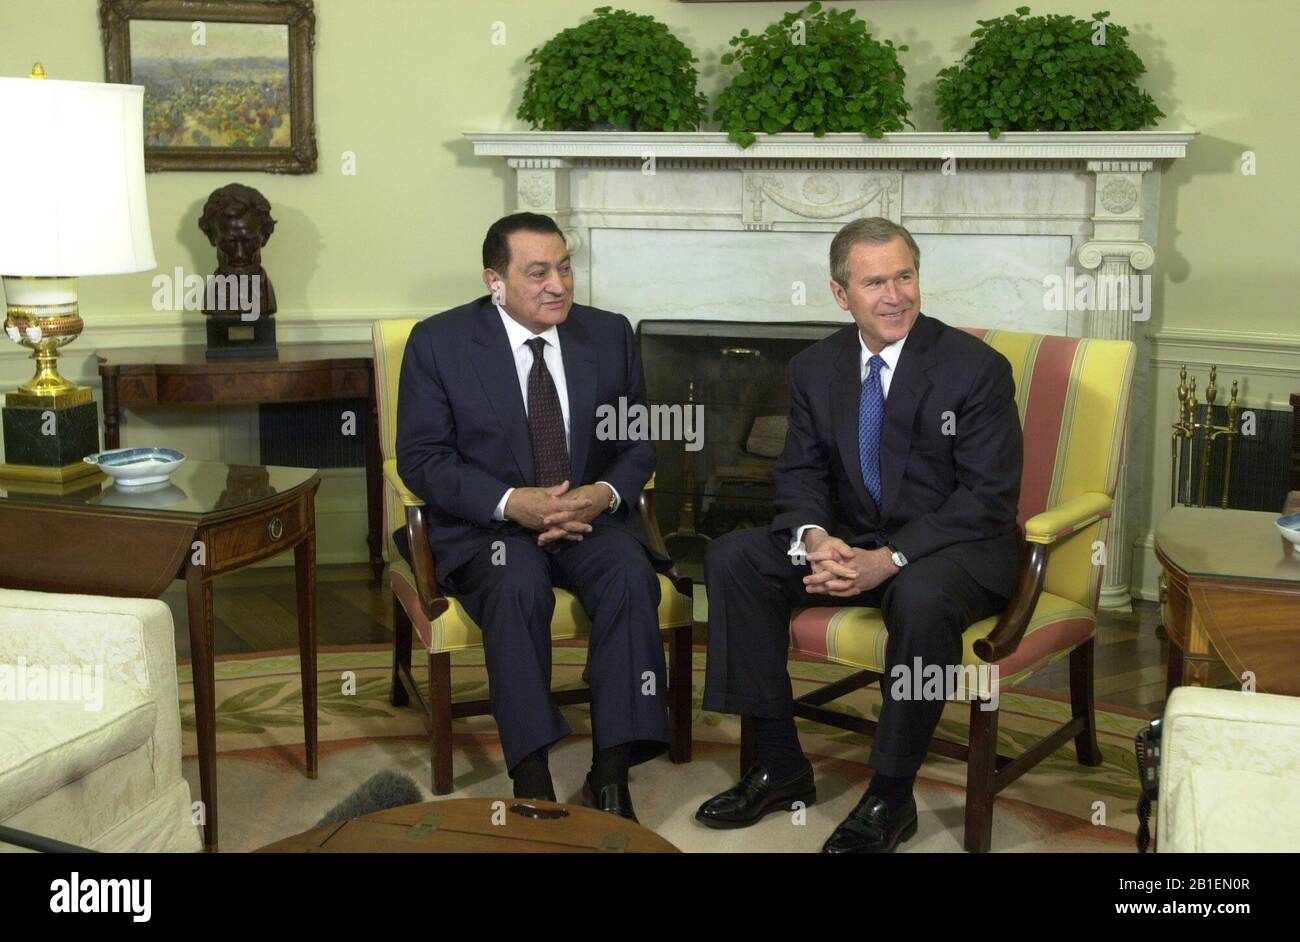 United States President George W. Bush meets President Hosni Mubarak of Egypt in the Oval Office at the White House in Washington, D.C. on Monday, April 2, 2001..Credit: Ron Sachs / CNP | usage worldwide Stock Photo